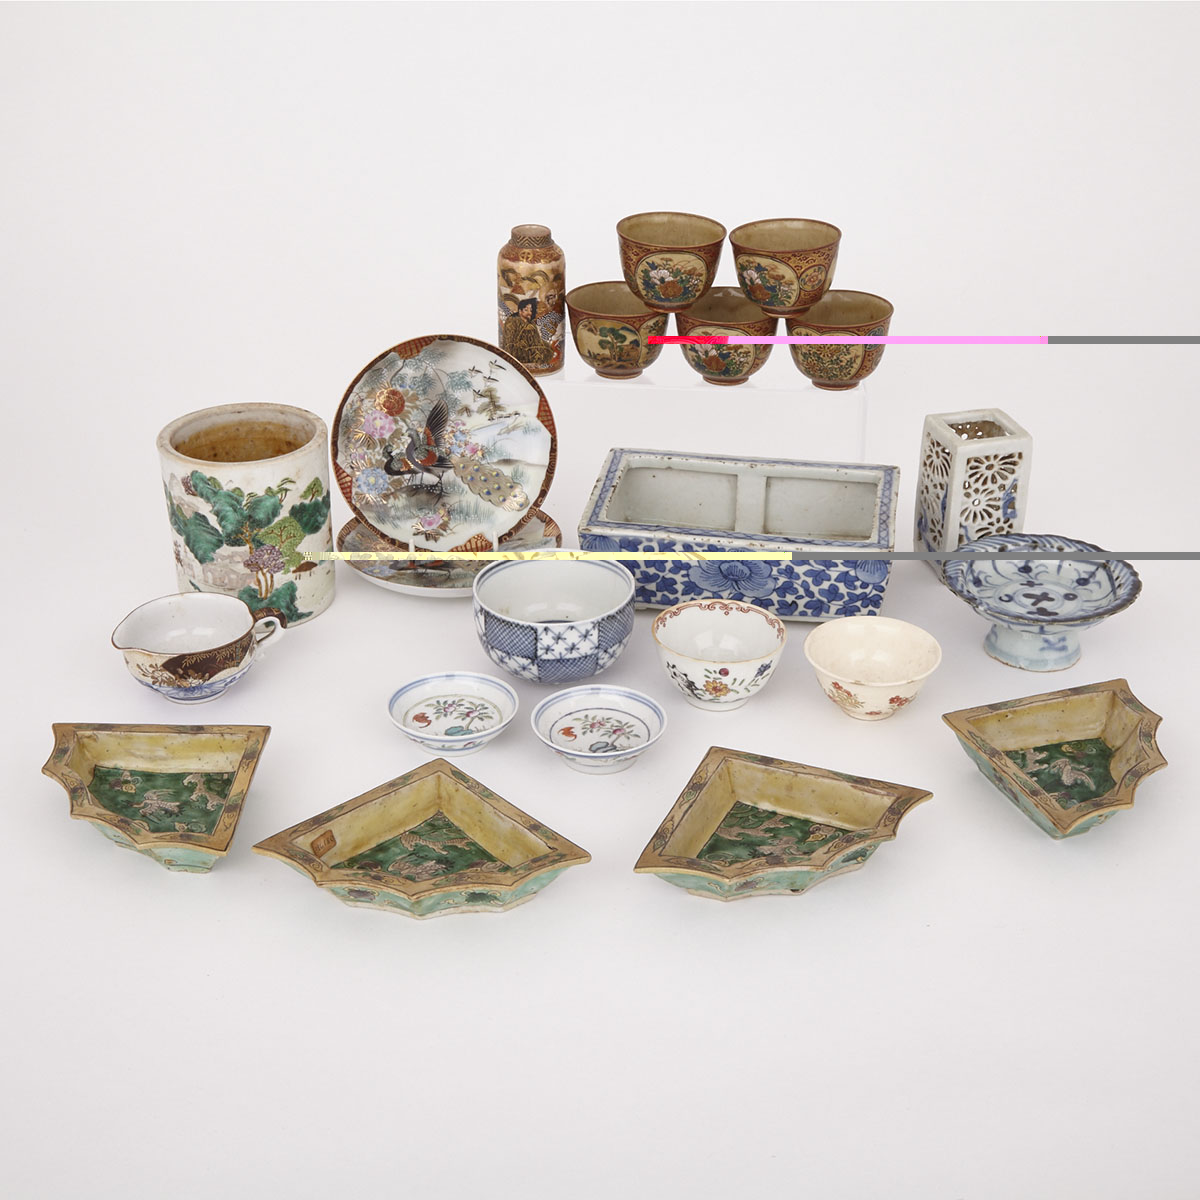 Twenty-Two Pieces of Asian Porcelain, 19th Century and Later